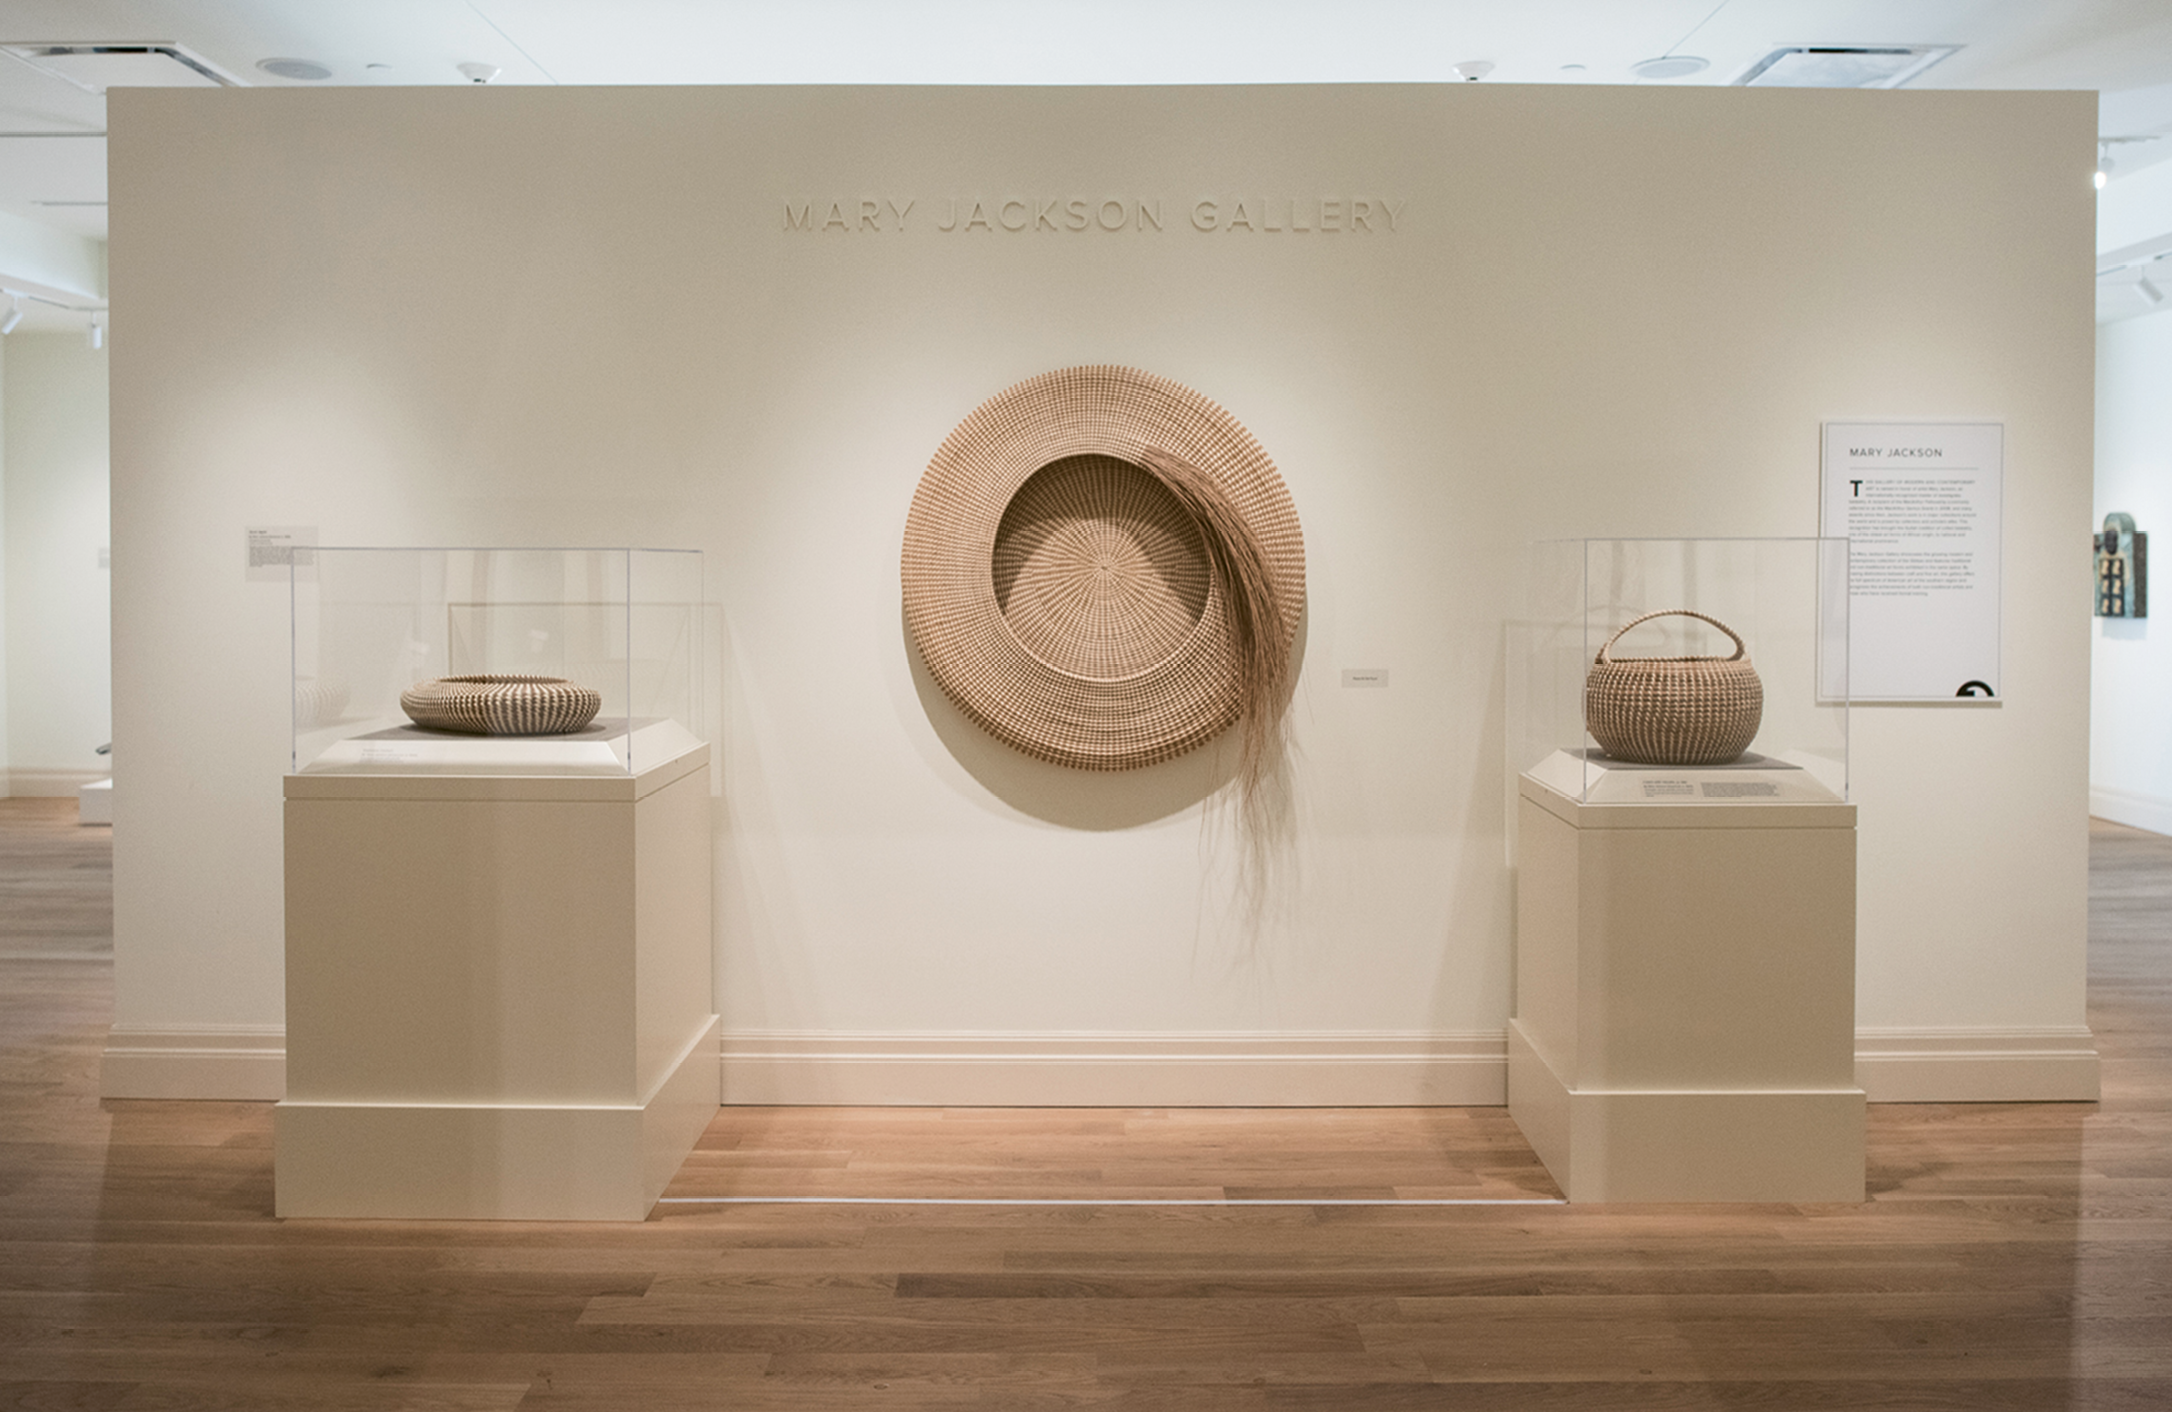 Modern Master: When the Gibbes reopened after an extensive renovation in 2016, the modern and contemporary galleries were named in Jackson’s honor. Her pieces are part of the museum’s permanent collection, including (center) Never Again and (right) Cobra with Handle (circa 1980; sweetgrass, bullrush, and palmetto; 15 x 16 inches), as well as (left) Diploma (sweetgrass, bulrush, and palmetto) which is on loan from a private collection.